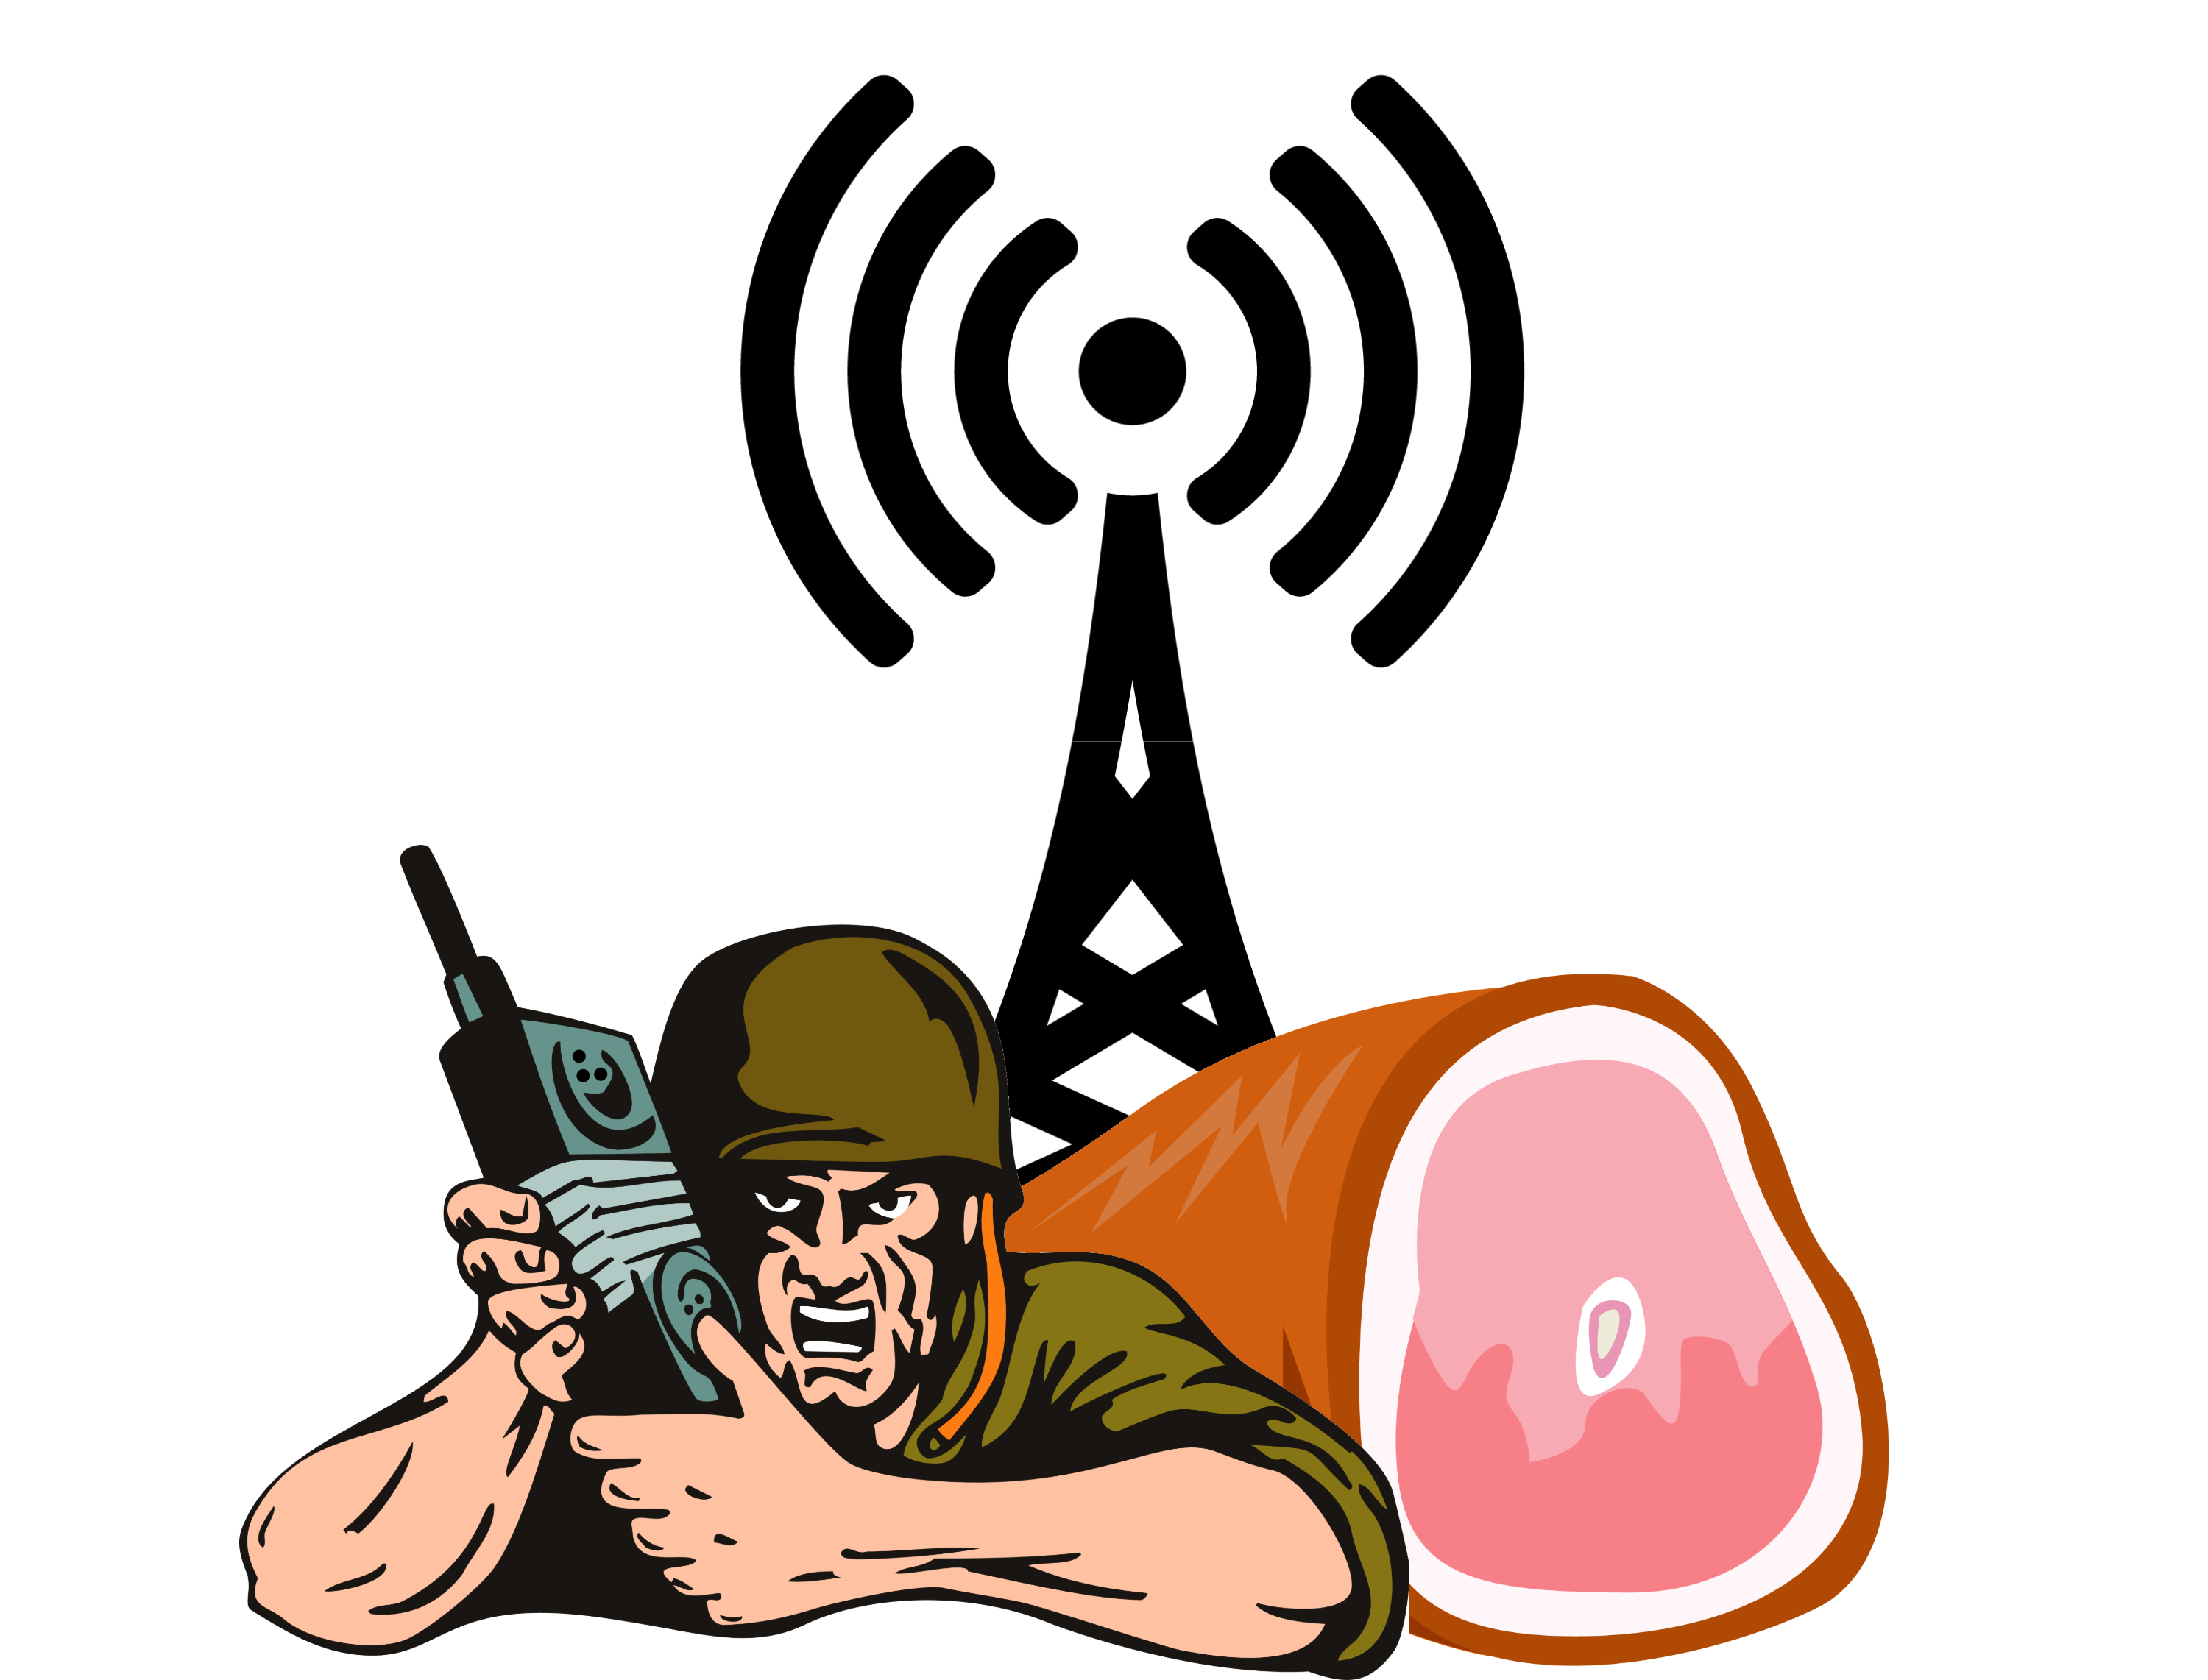 Soldier holding radio in front of a ham hawk and radio tower